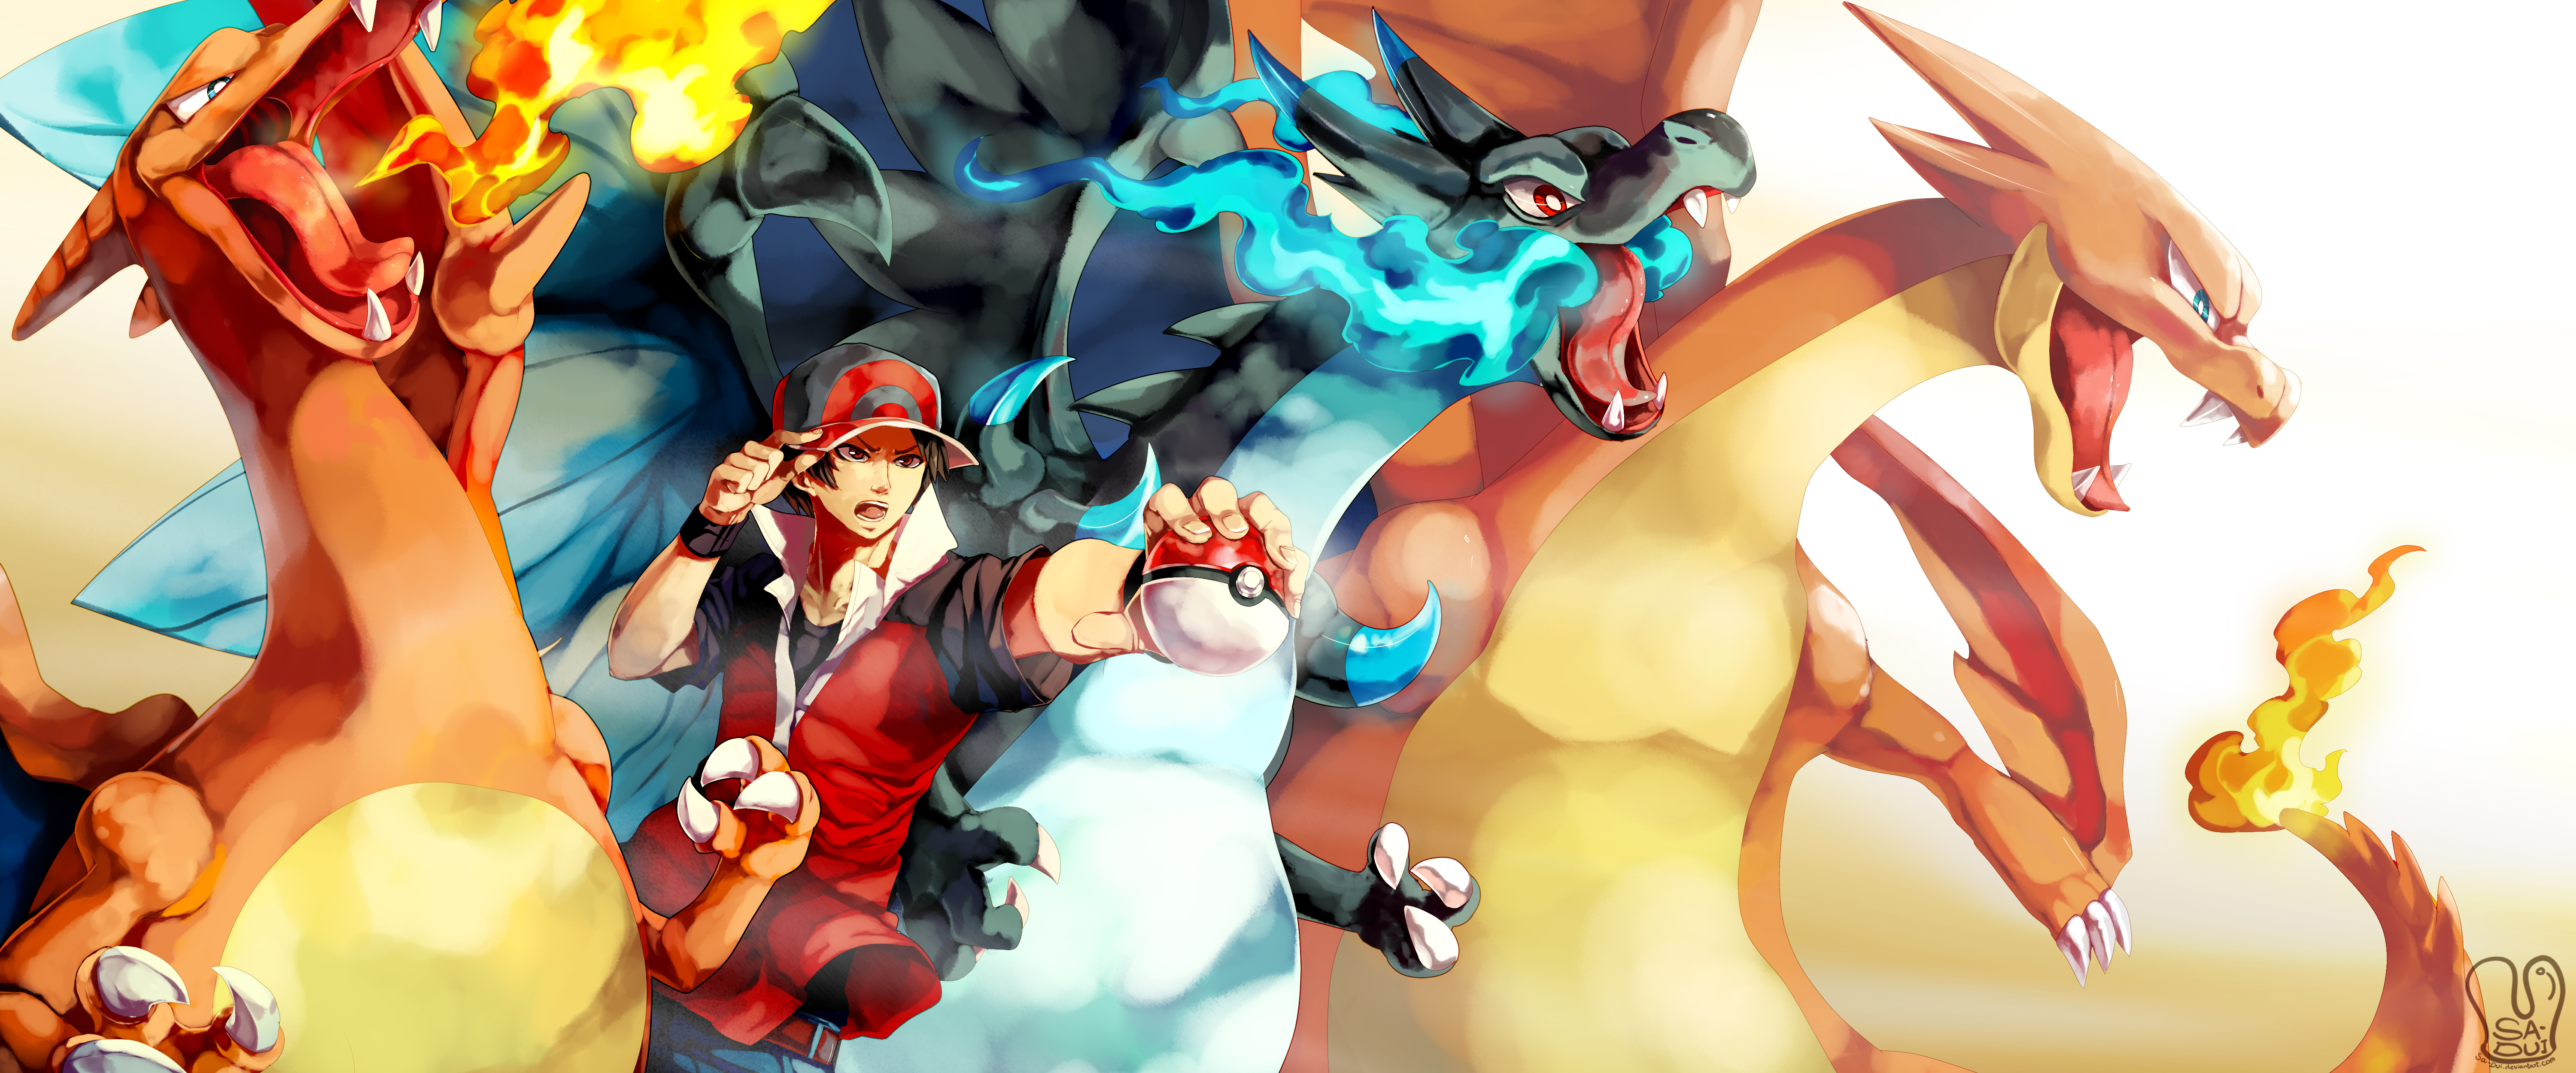 Ash And Charizard Wallpapers - Wallpaper Cave